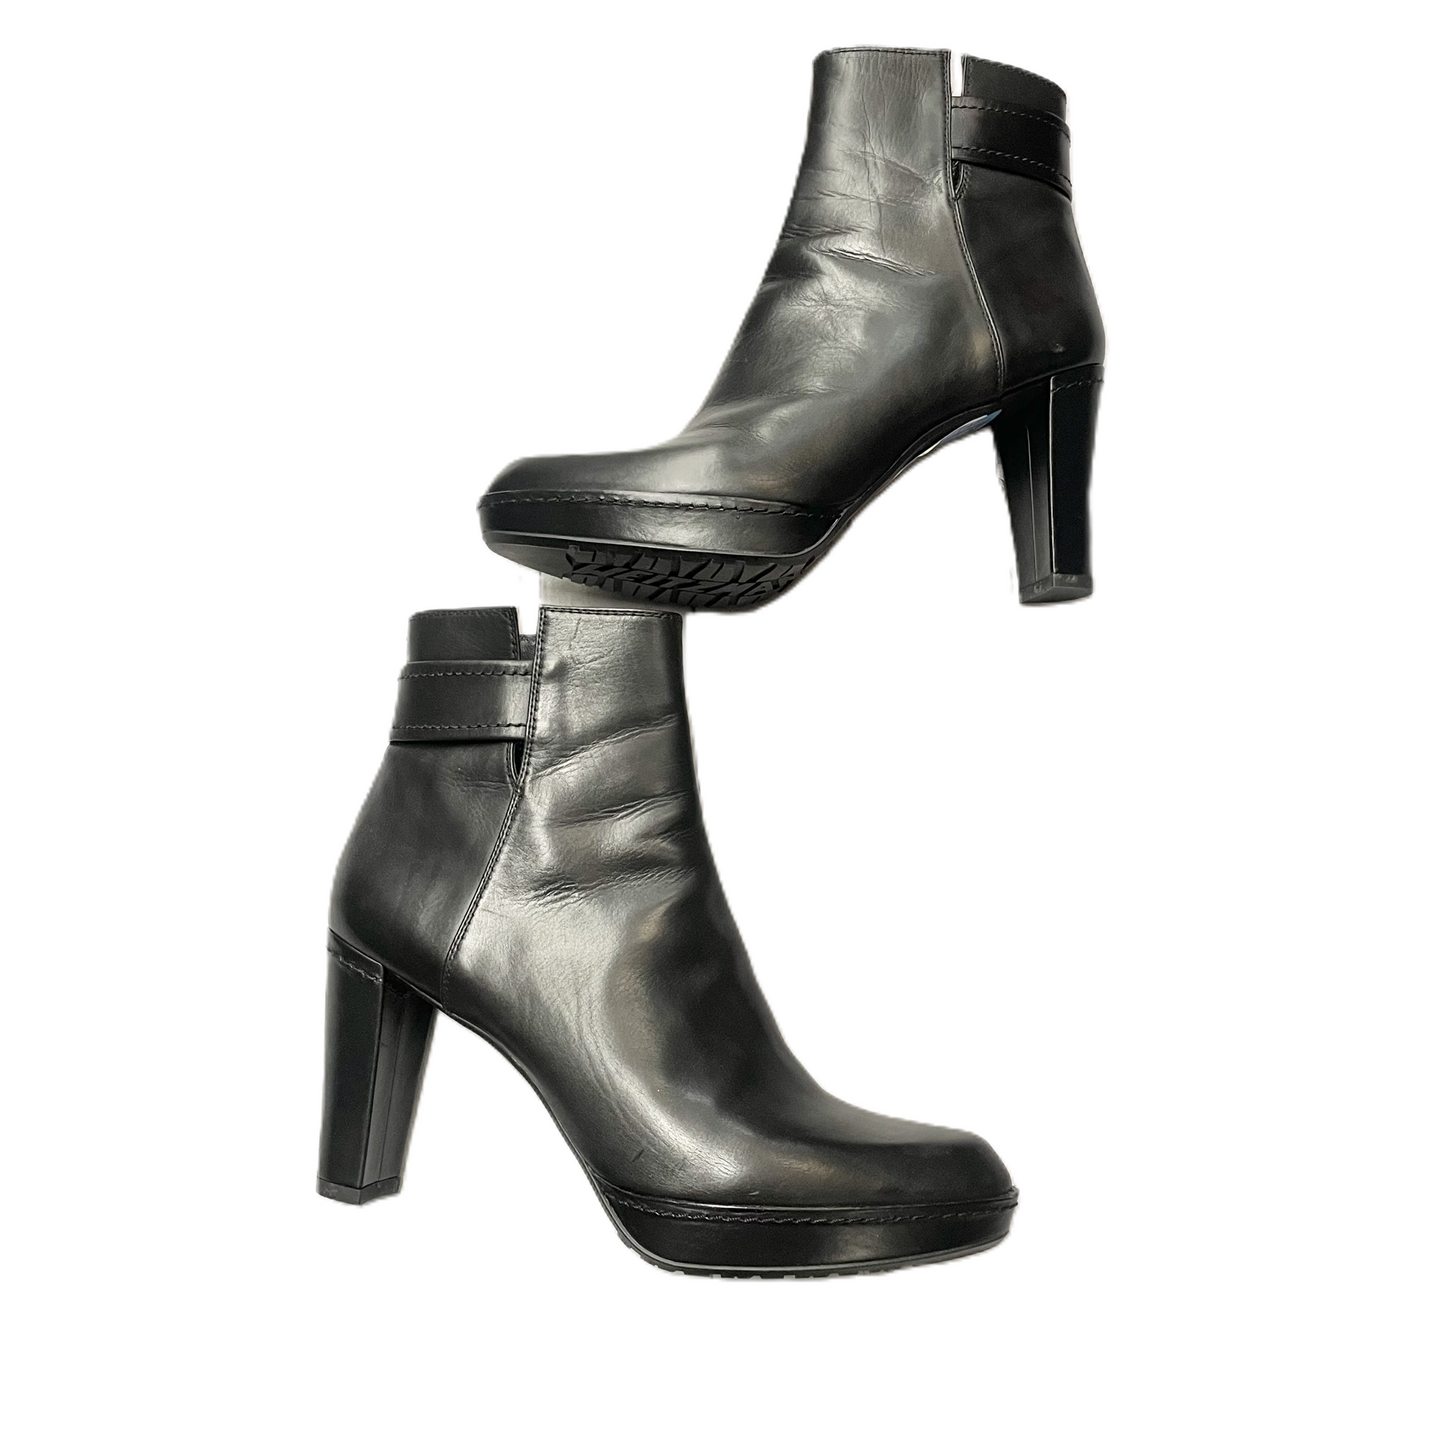 Boots Ankle Heels By Stuart Weitzman  Size: 11